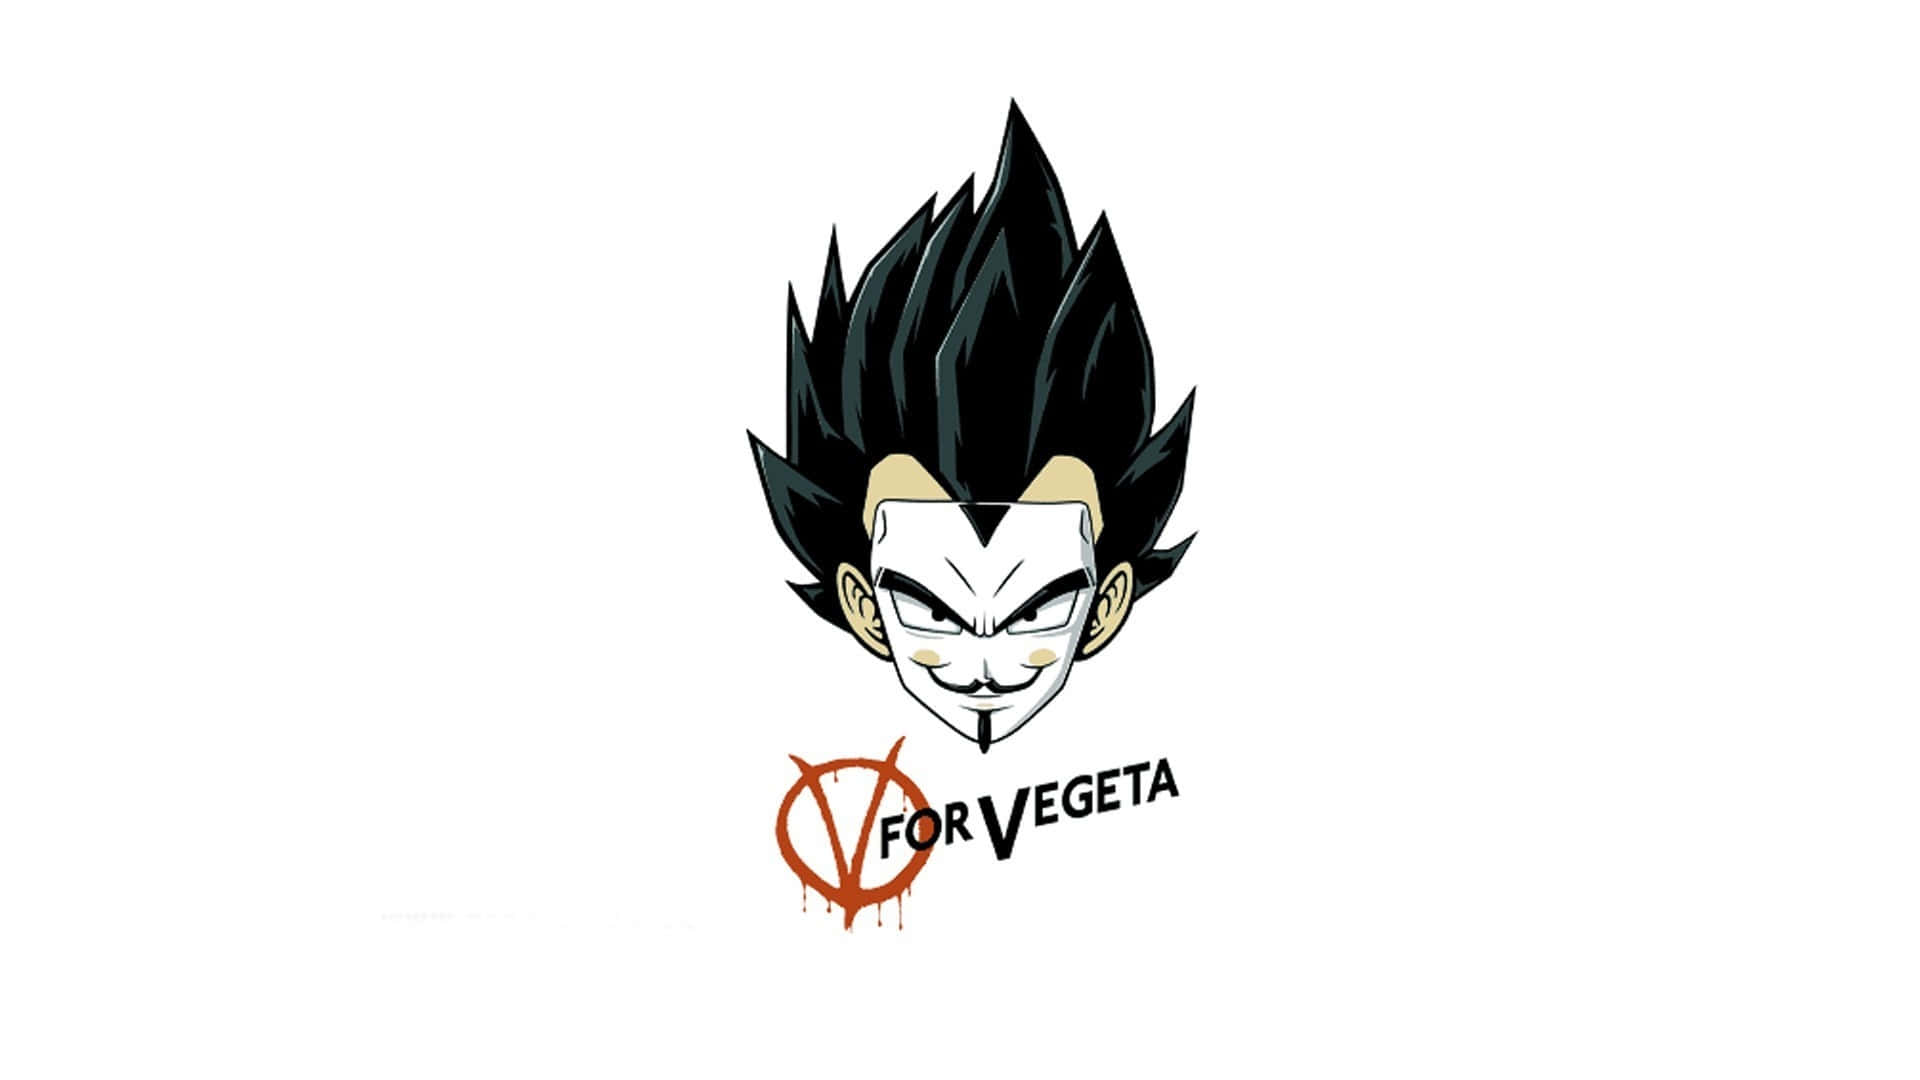 Vegeta is one of the fan-favorite warriors of Dragon Ball Z and this image perfectly captures his authority and power.